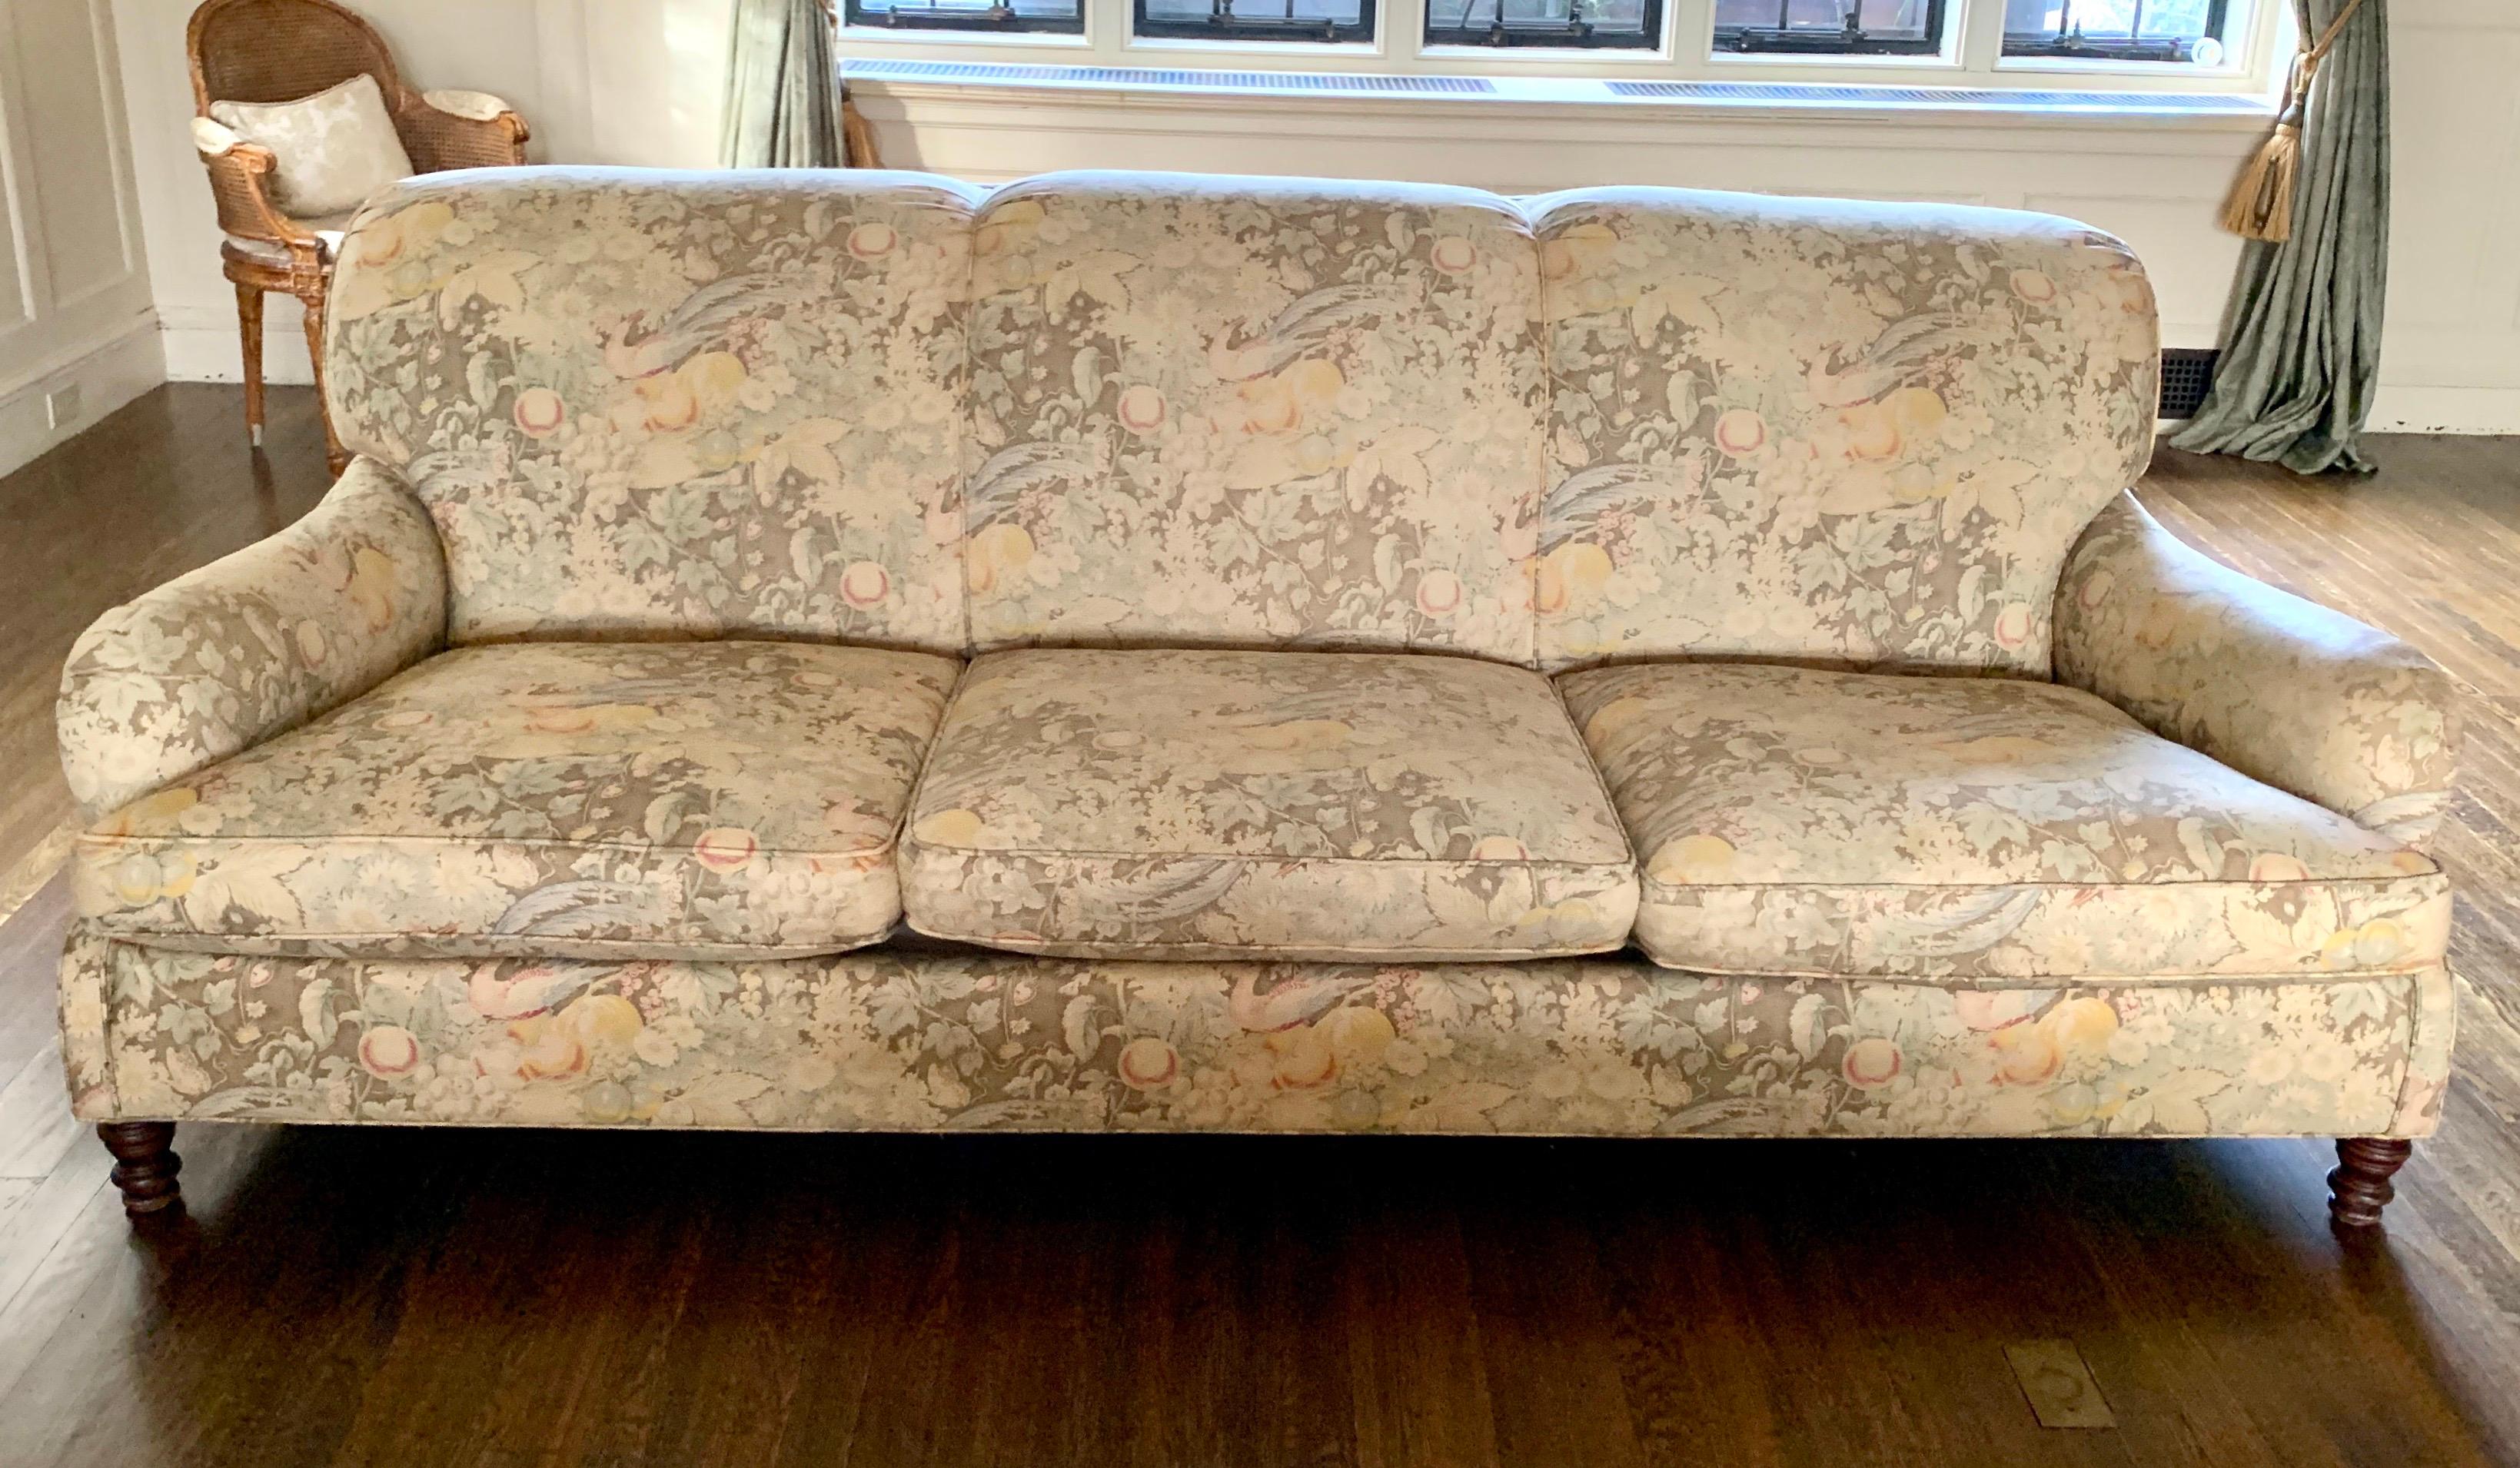 Elegant vintage signed Ralph Lauren three-seat sofa.
This vintage sofa, circa late 1970s, is all original and has down cushions. The fabric, also original, features a park like setting with birds, fruit and vegetation.